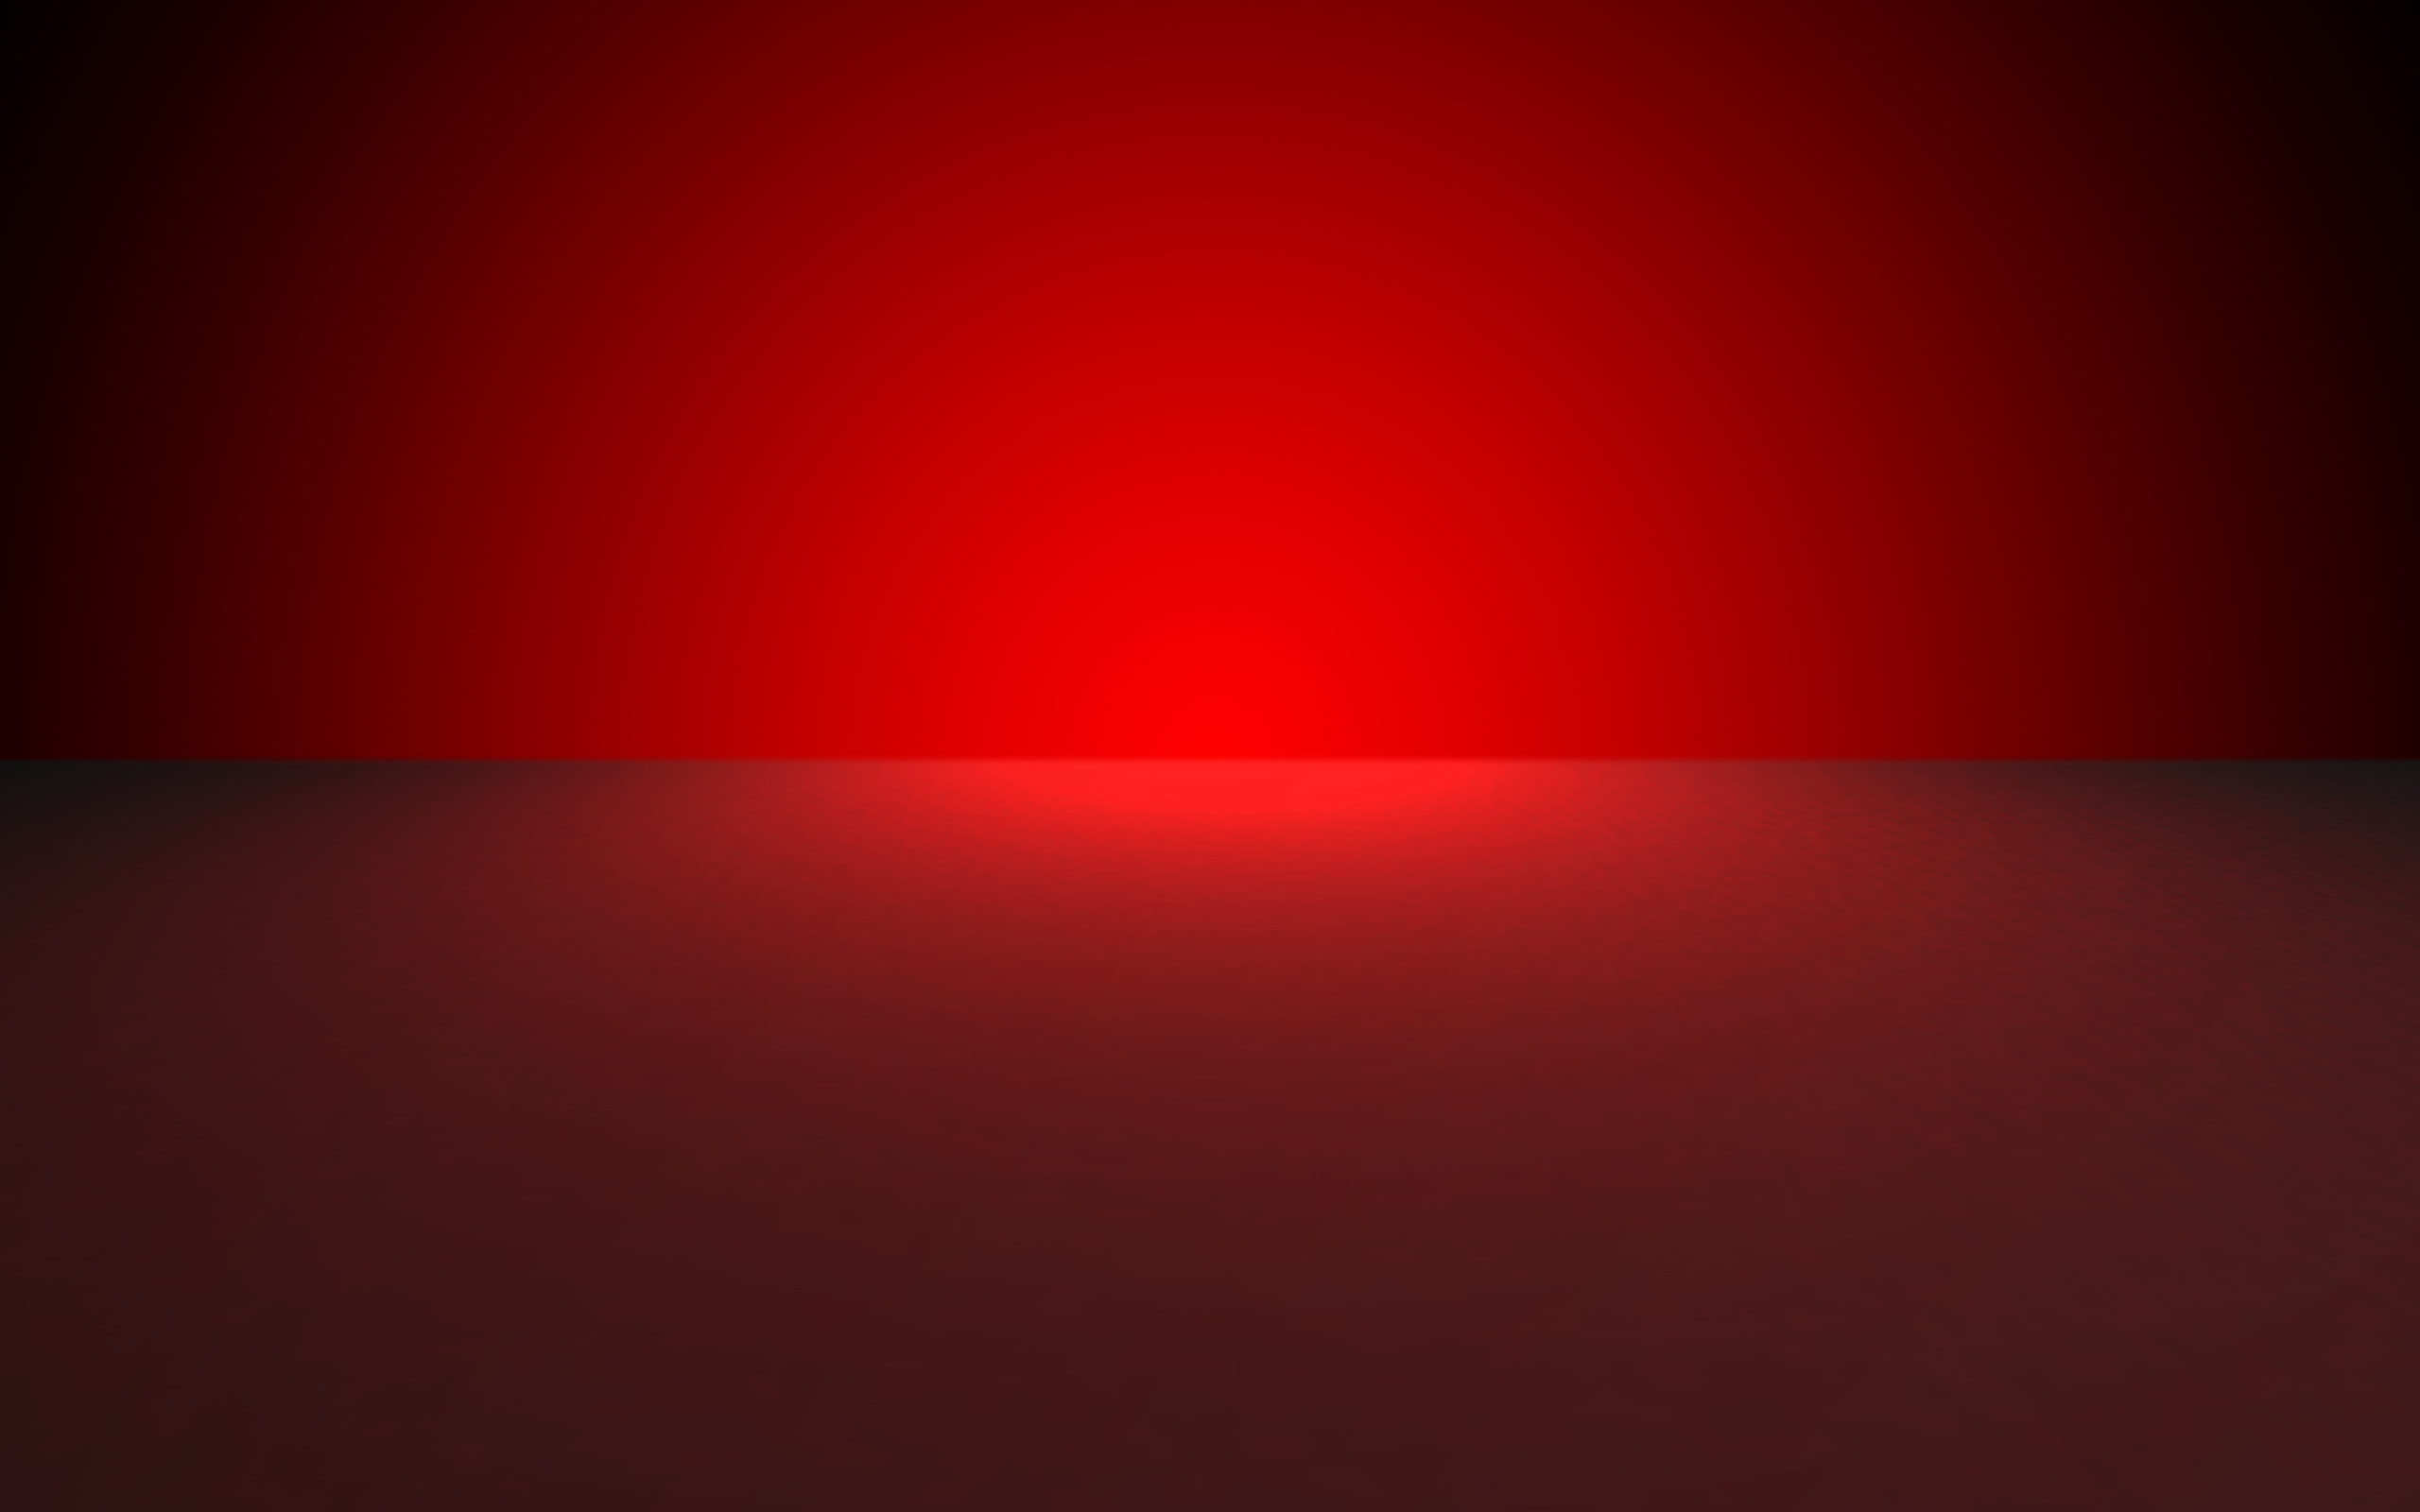 Wallpaper 15 Sunset Red and Black Wallpapers 2560x1600